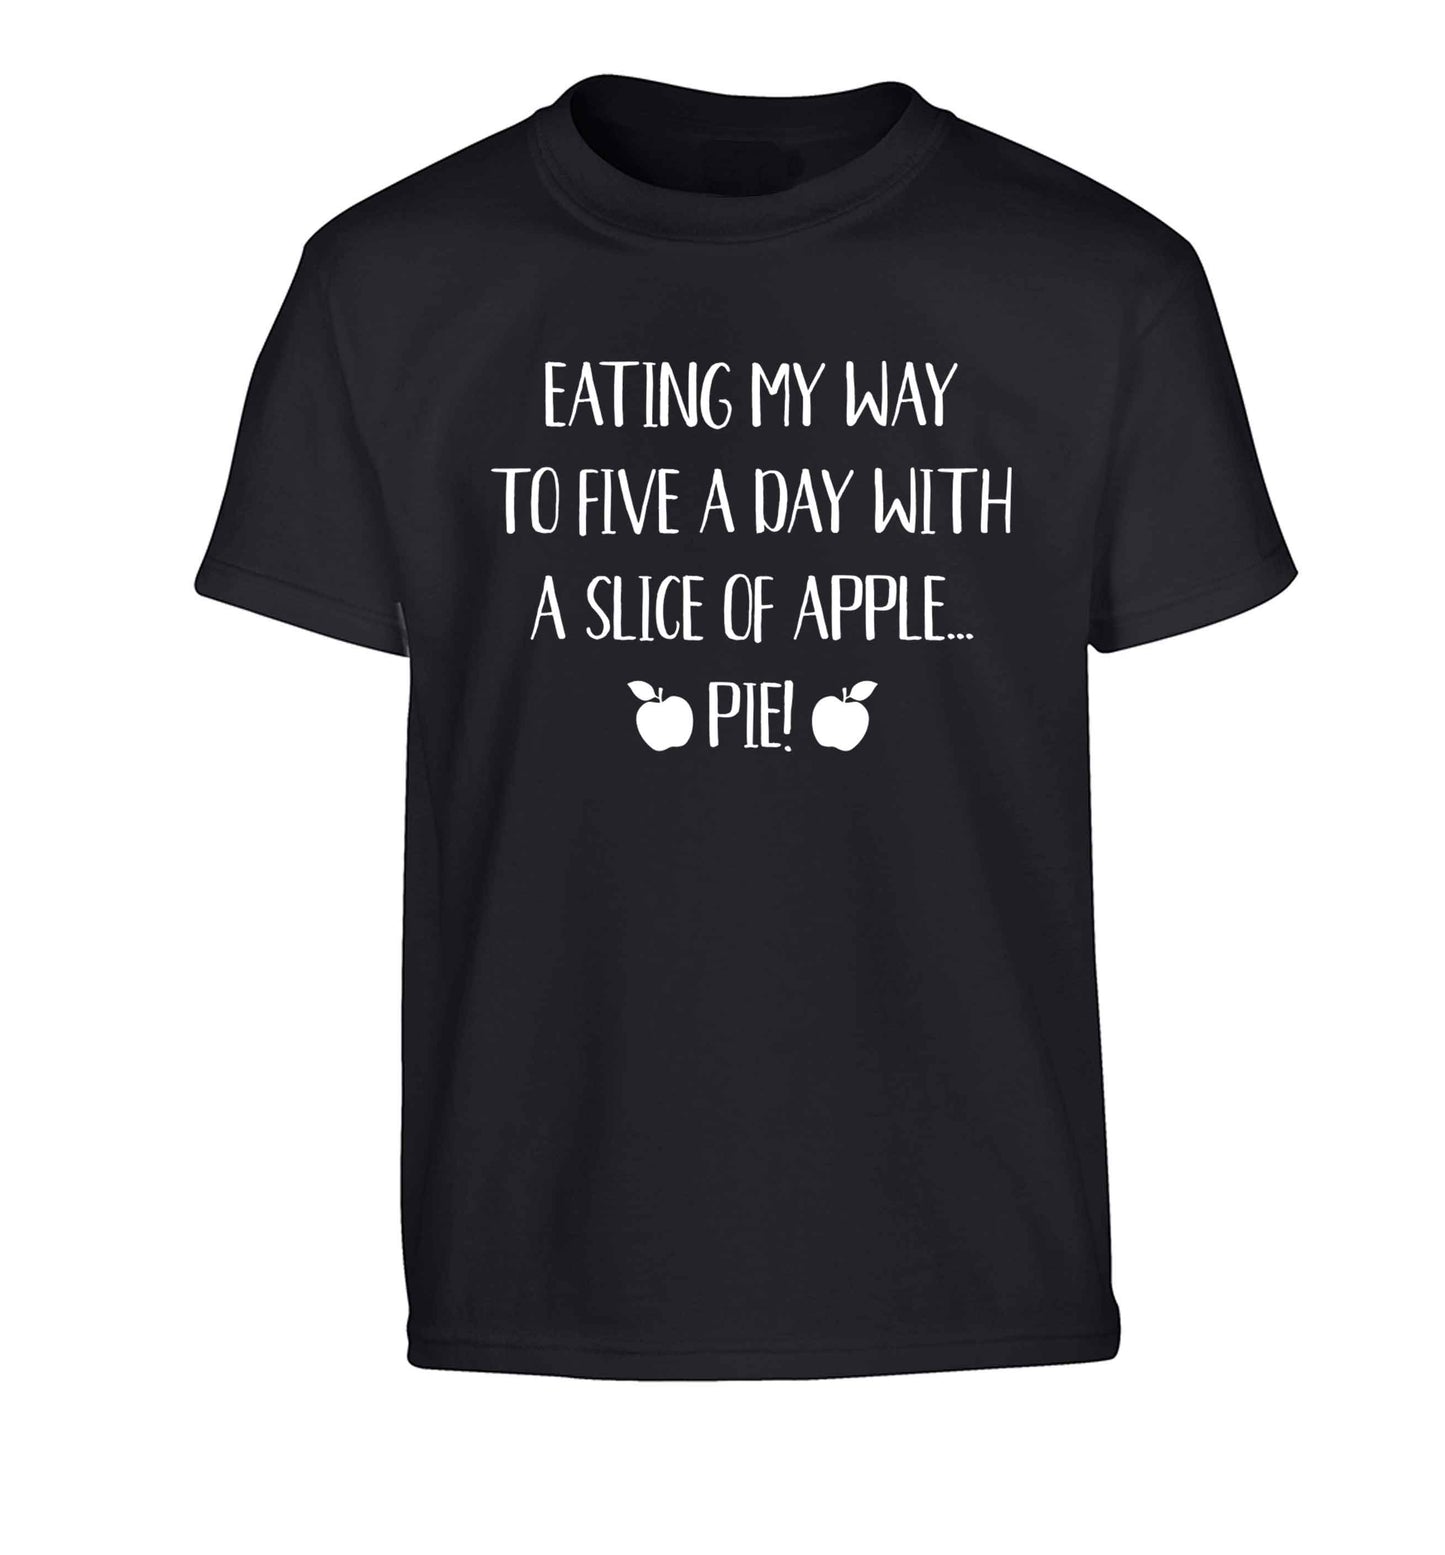 Eating my way to five a day with a slice of apple pie Children's black Tshirt 12-13 Years